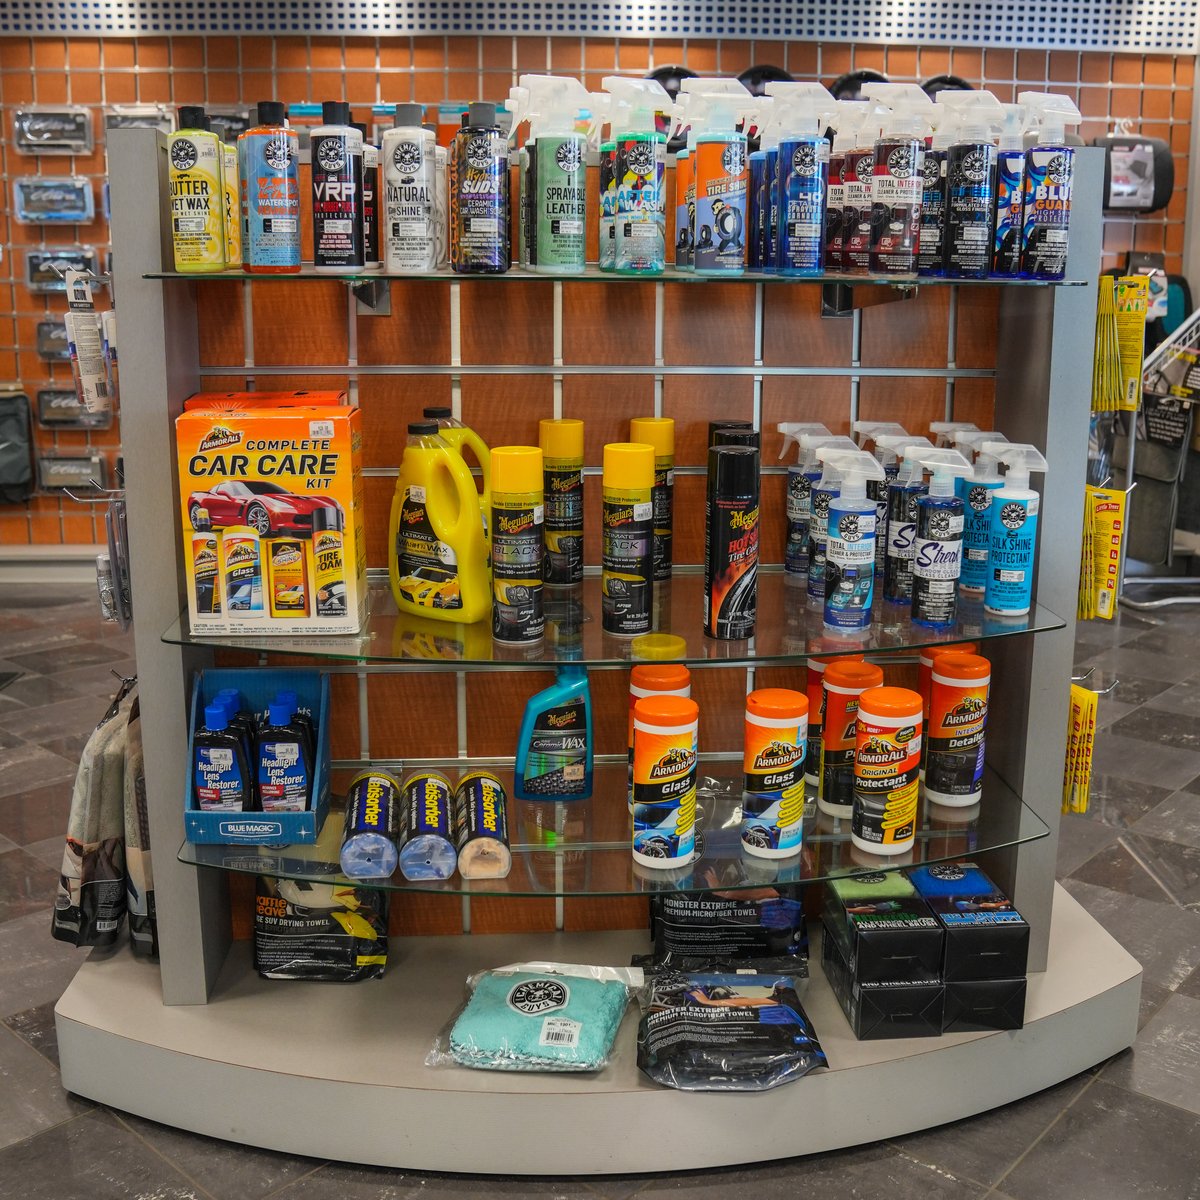 Pamper your beloved vehicle with our selection of top-notch merchandise and cleaning supplies, available in our parts department!

#honda #parts #tlc #carcare #detail #cleaningsupplies #montclair #hondalove